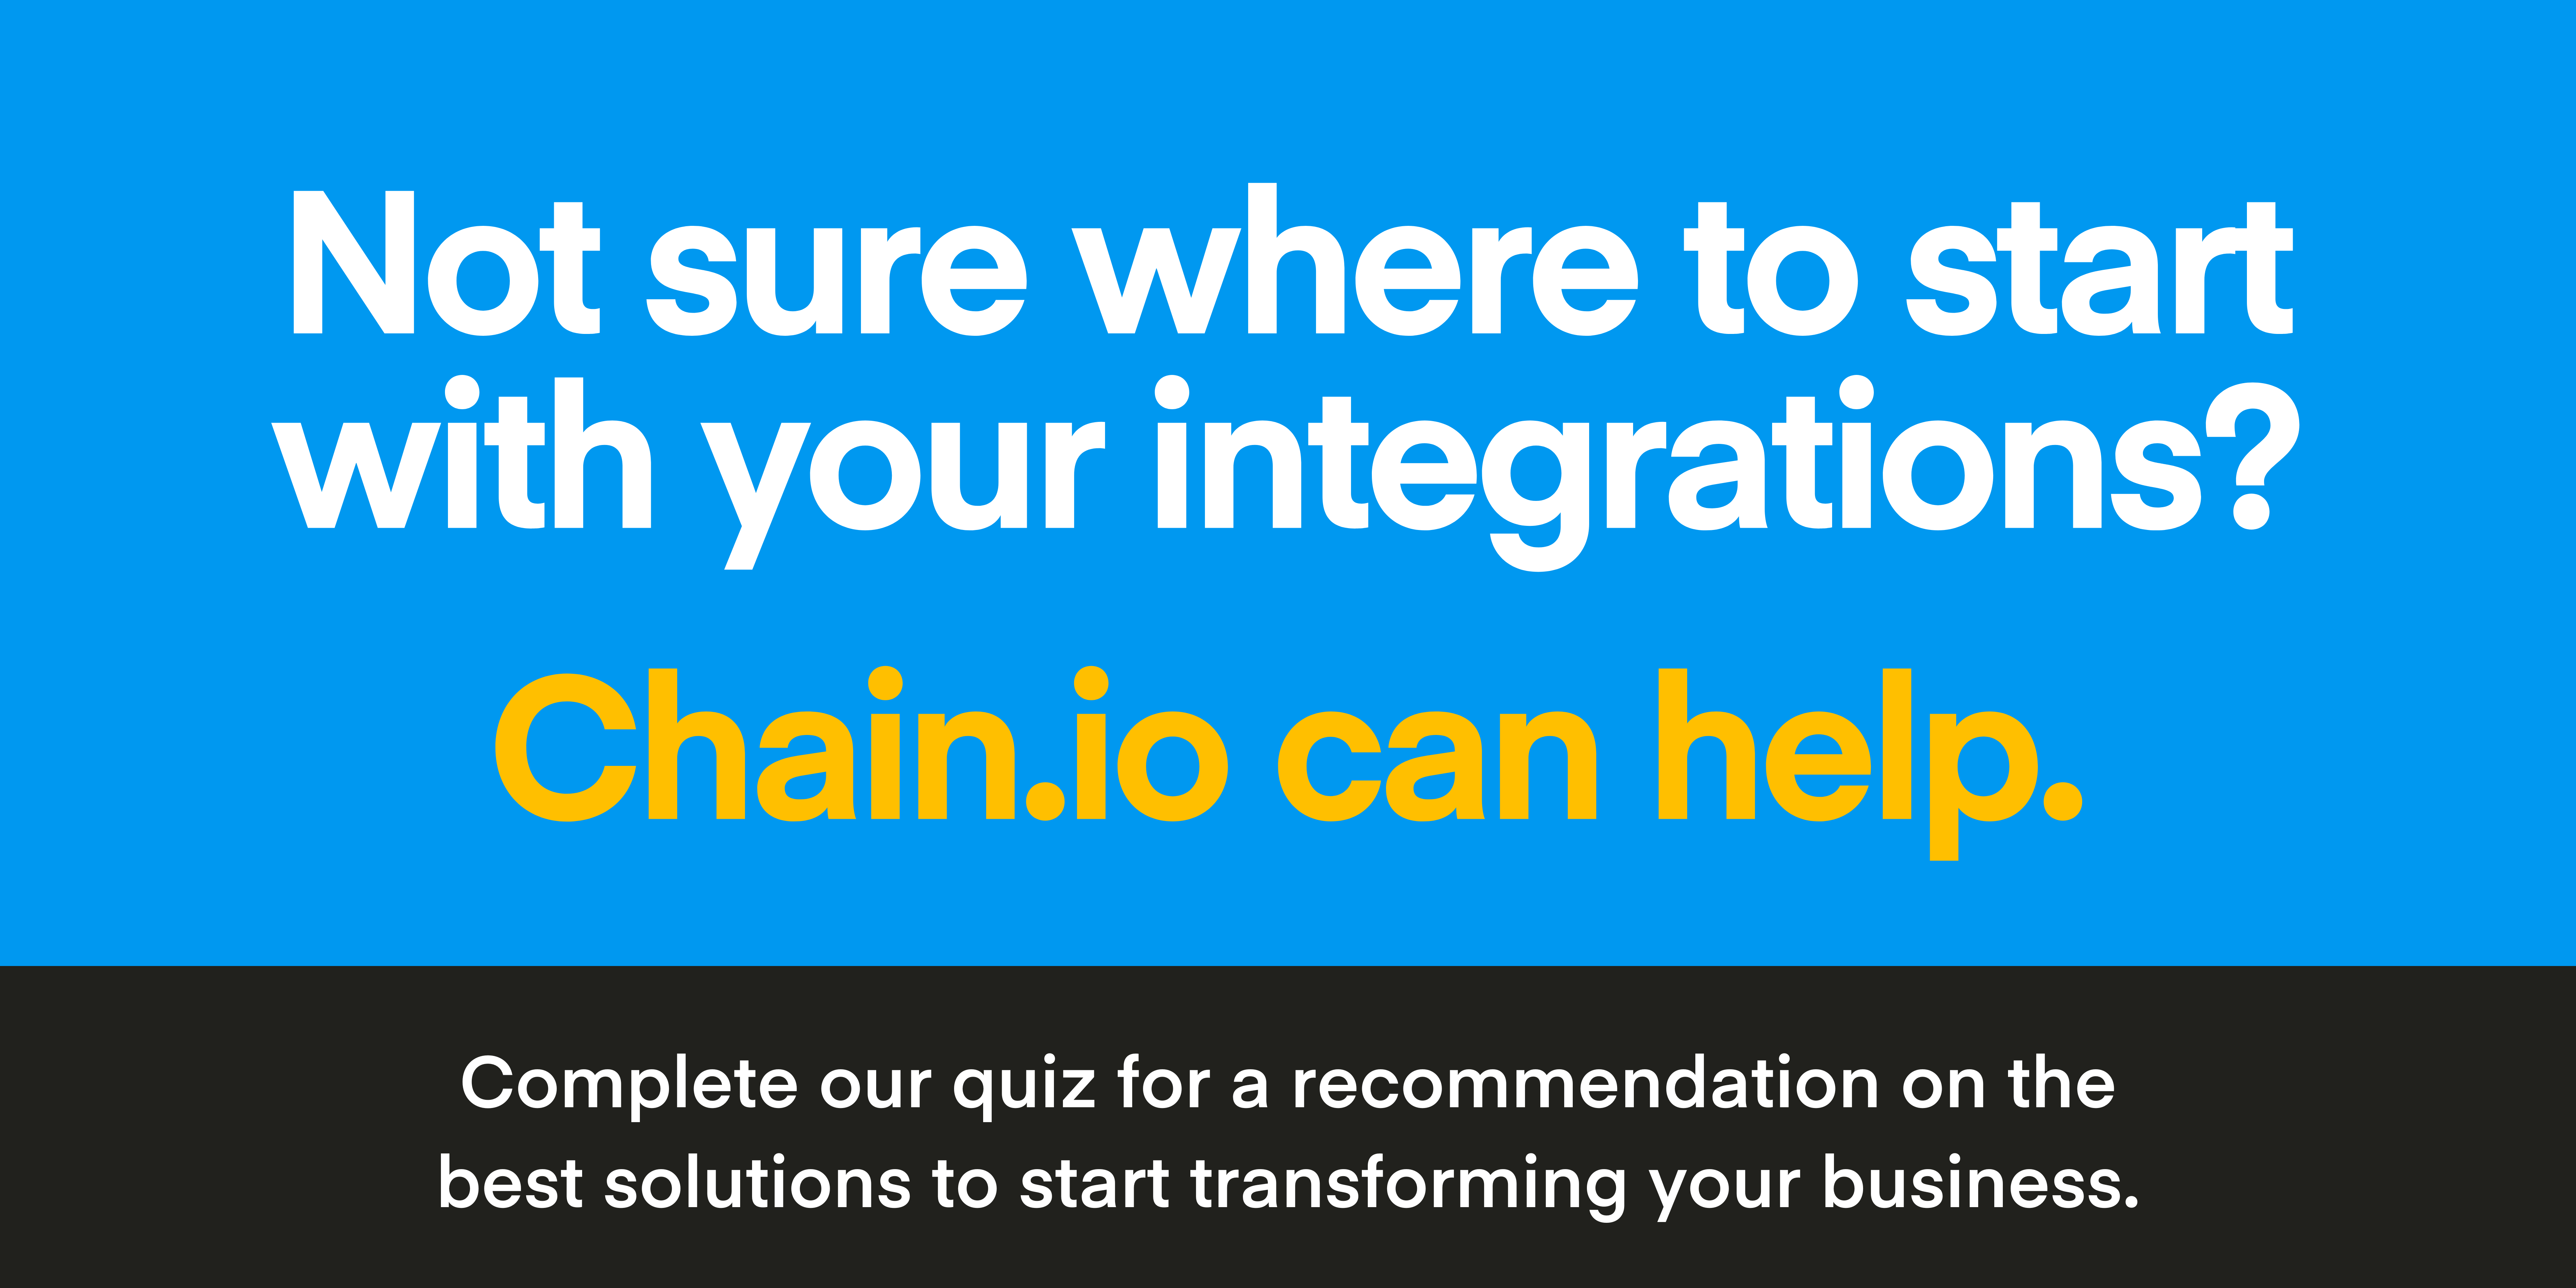 If you’re not sure where to get started, our supply chain integration quiz can help you diagnose the best first steps to take towards improving transparency and data flow. 